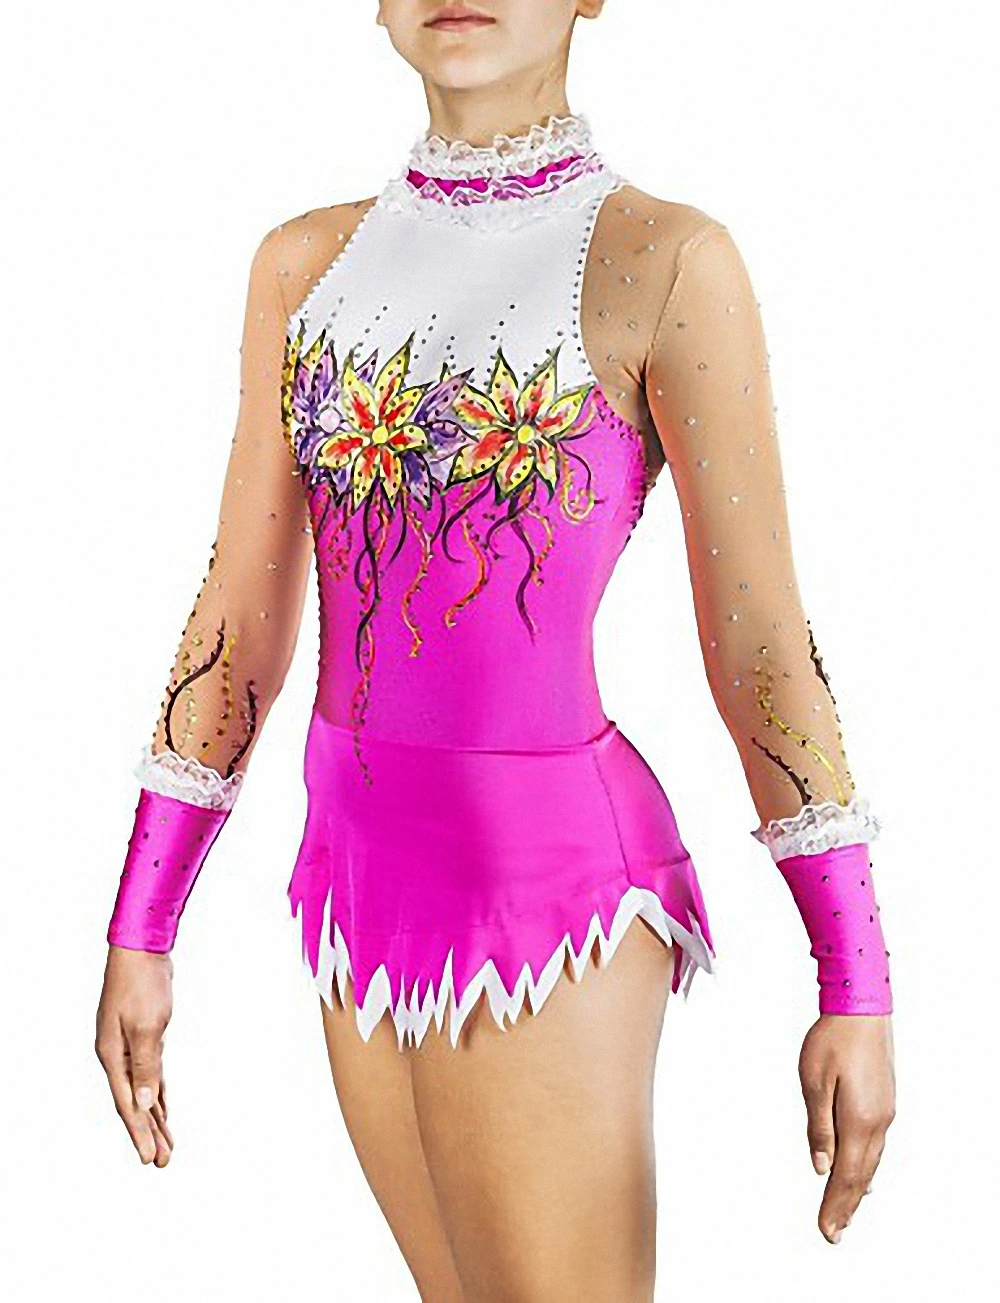 Baton costumes for competition